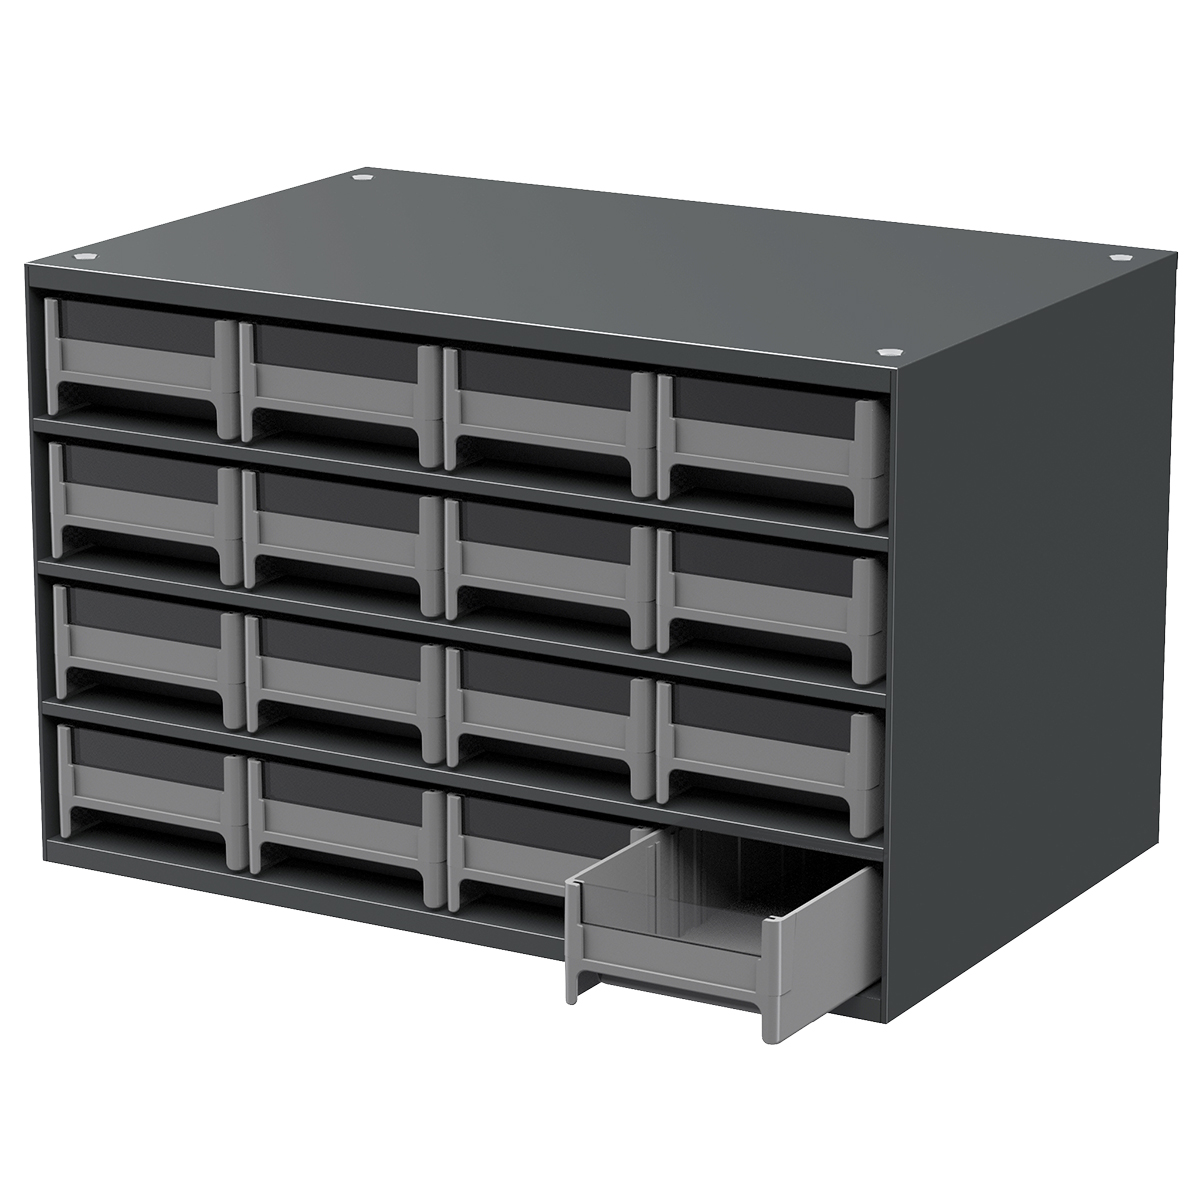 Akro-Mils 10116 16 Drawer Plastic Parts Storage Hardware and Craft Cabinet 10.5-Inch x 8.5-Inch x 6.5-Inch Black Pack of 2